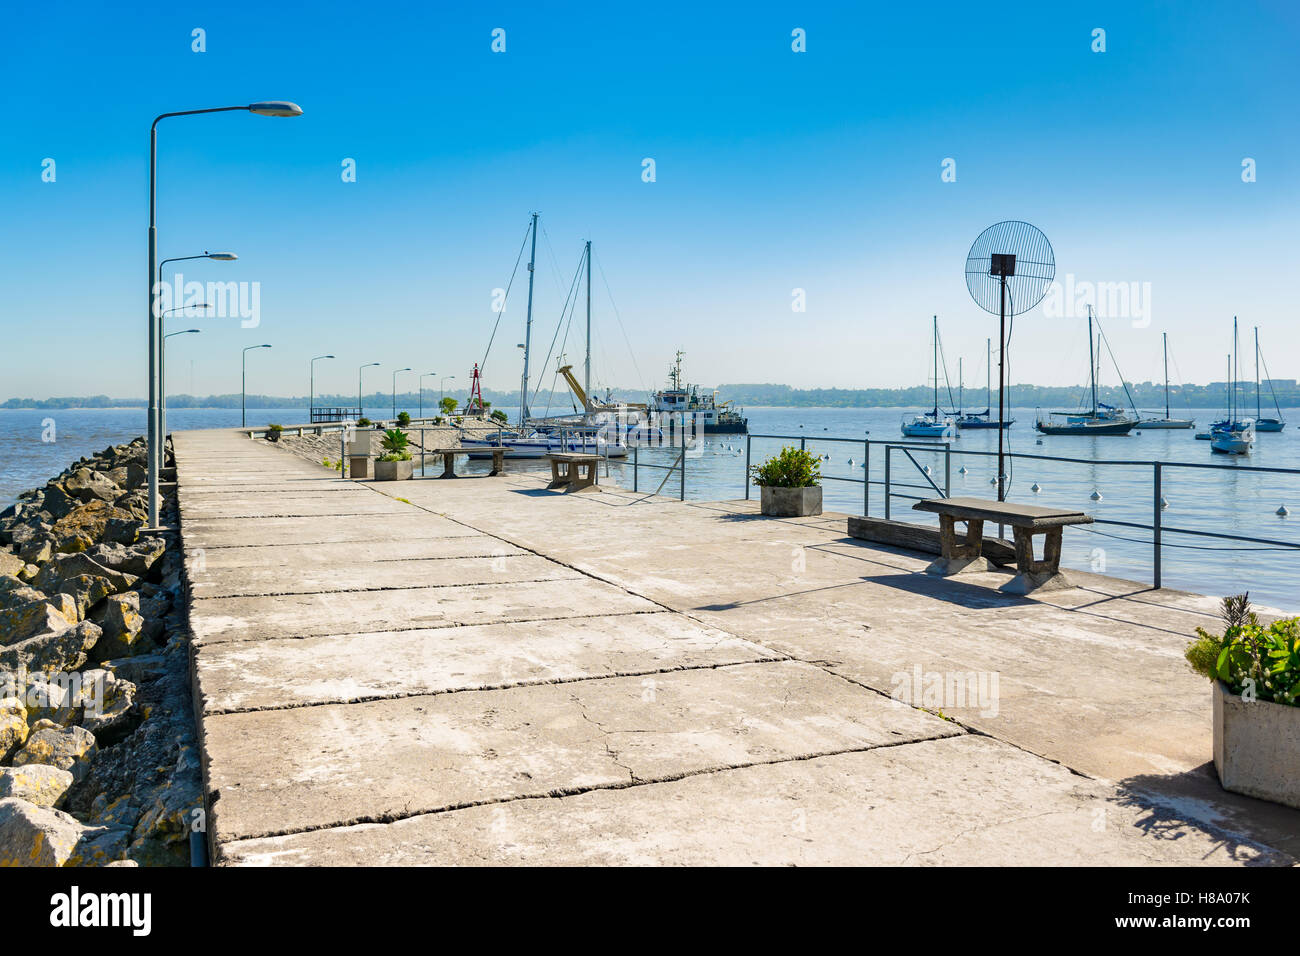 A view over boats moored at the secondary harbor of Colonia del Sacramento, Uruguay Stock Photo